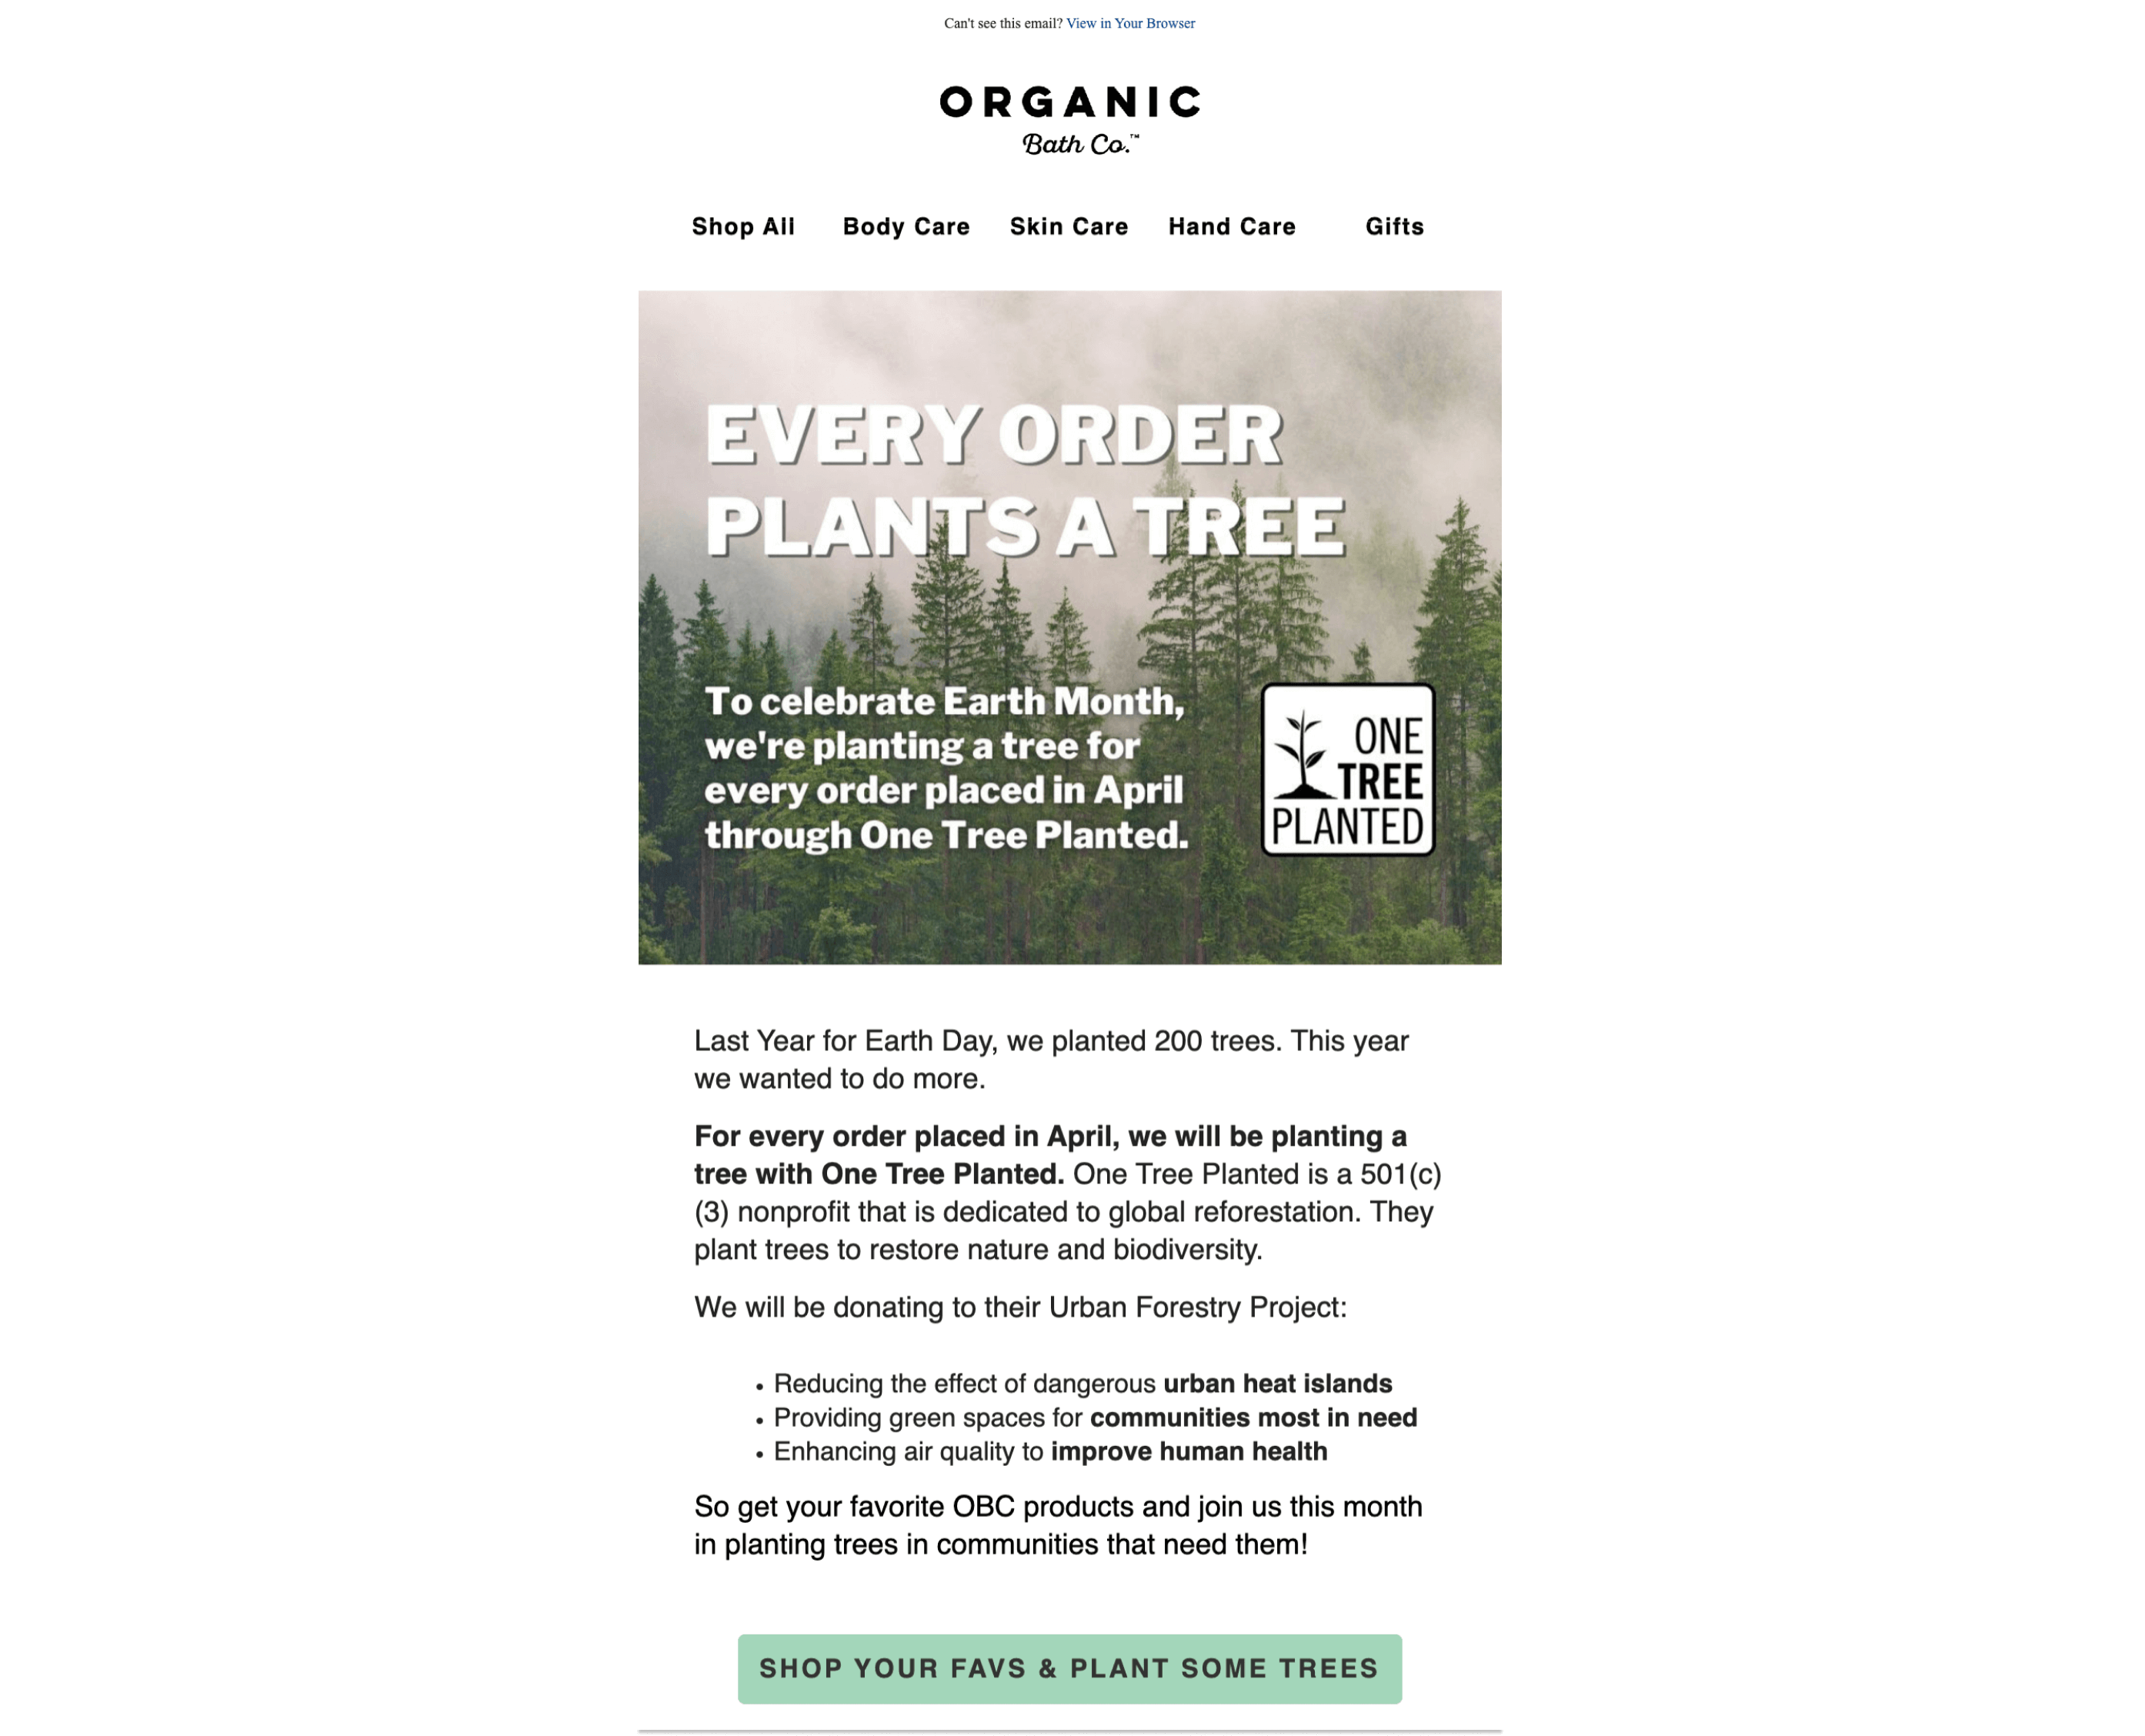 Sustainable brands–Organic Bath Co.’s email campaign promoting its annual Earth Month promotion. The header is Every Order Plants a Tree. The body of the email is To celebrate Earth Month, we’re planting a tree for every order placed in April through One Tree Planted. Last Year for Earth Day, we planted 200 trees. This year we wanted to do more. For every order placed in April, we will be planting a tree with One Tree Planted. One Tree Planted is a 501(c)(3) nonprofit that is dedicated to global reforestation. They plant trees to restore nature and biodiversity. We will be donating to their Urban Forestry Project: Reducing the effect of dangerous urban heat islands; Providing green spaces for communities most in need; and Enhancing air quality to improve human health. So get your favorite OBC products and join us this month in planting trees in communities that need them! The email concludes with a call-to-action: Shop Your Favs and Plant Some Trees. 